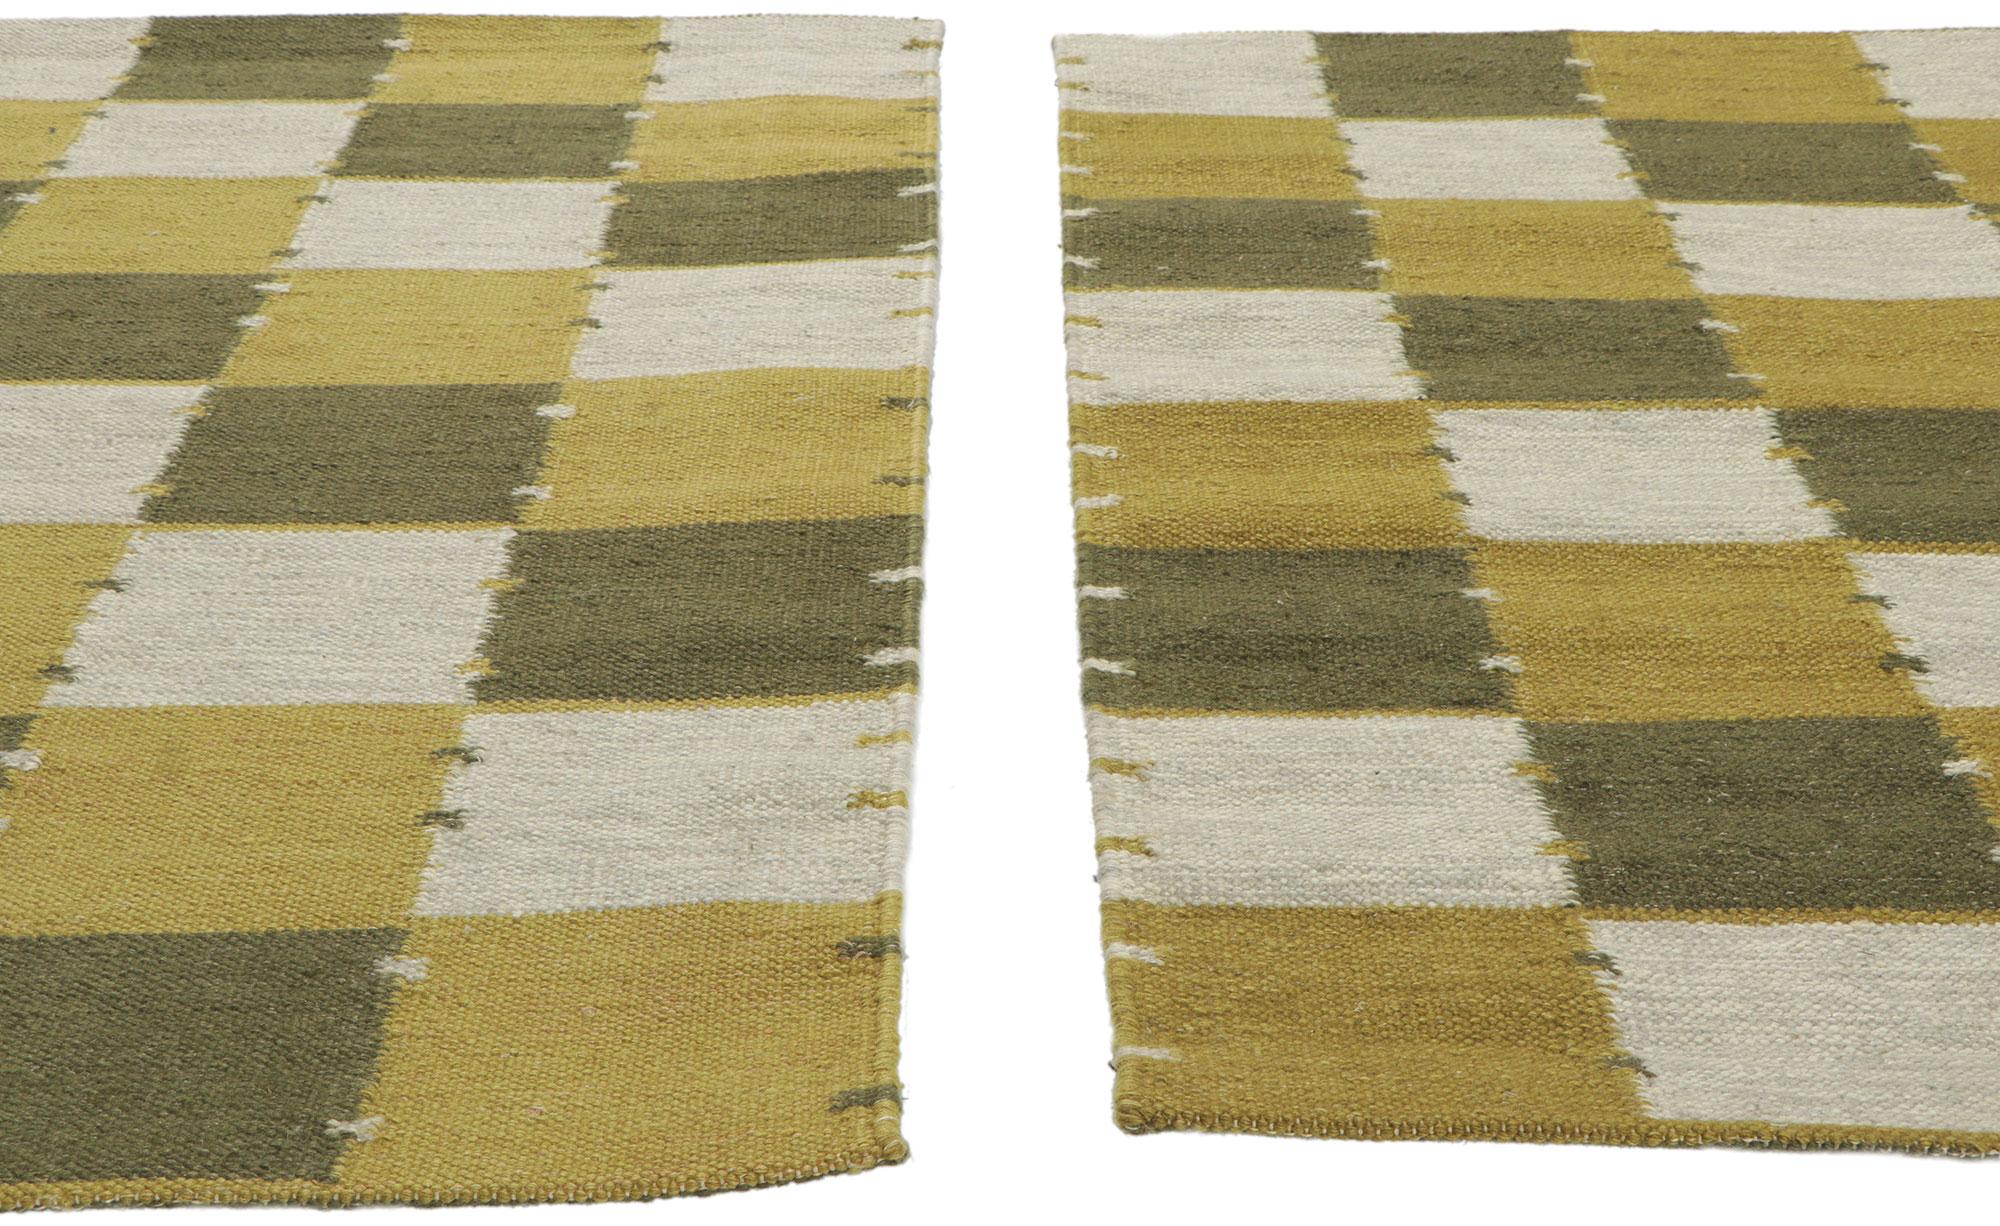 New Pair of Matching Swedish Inspired Kilim Rugs In New Condition For Sale In Dallas, TX